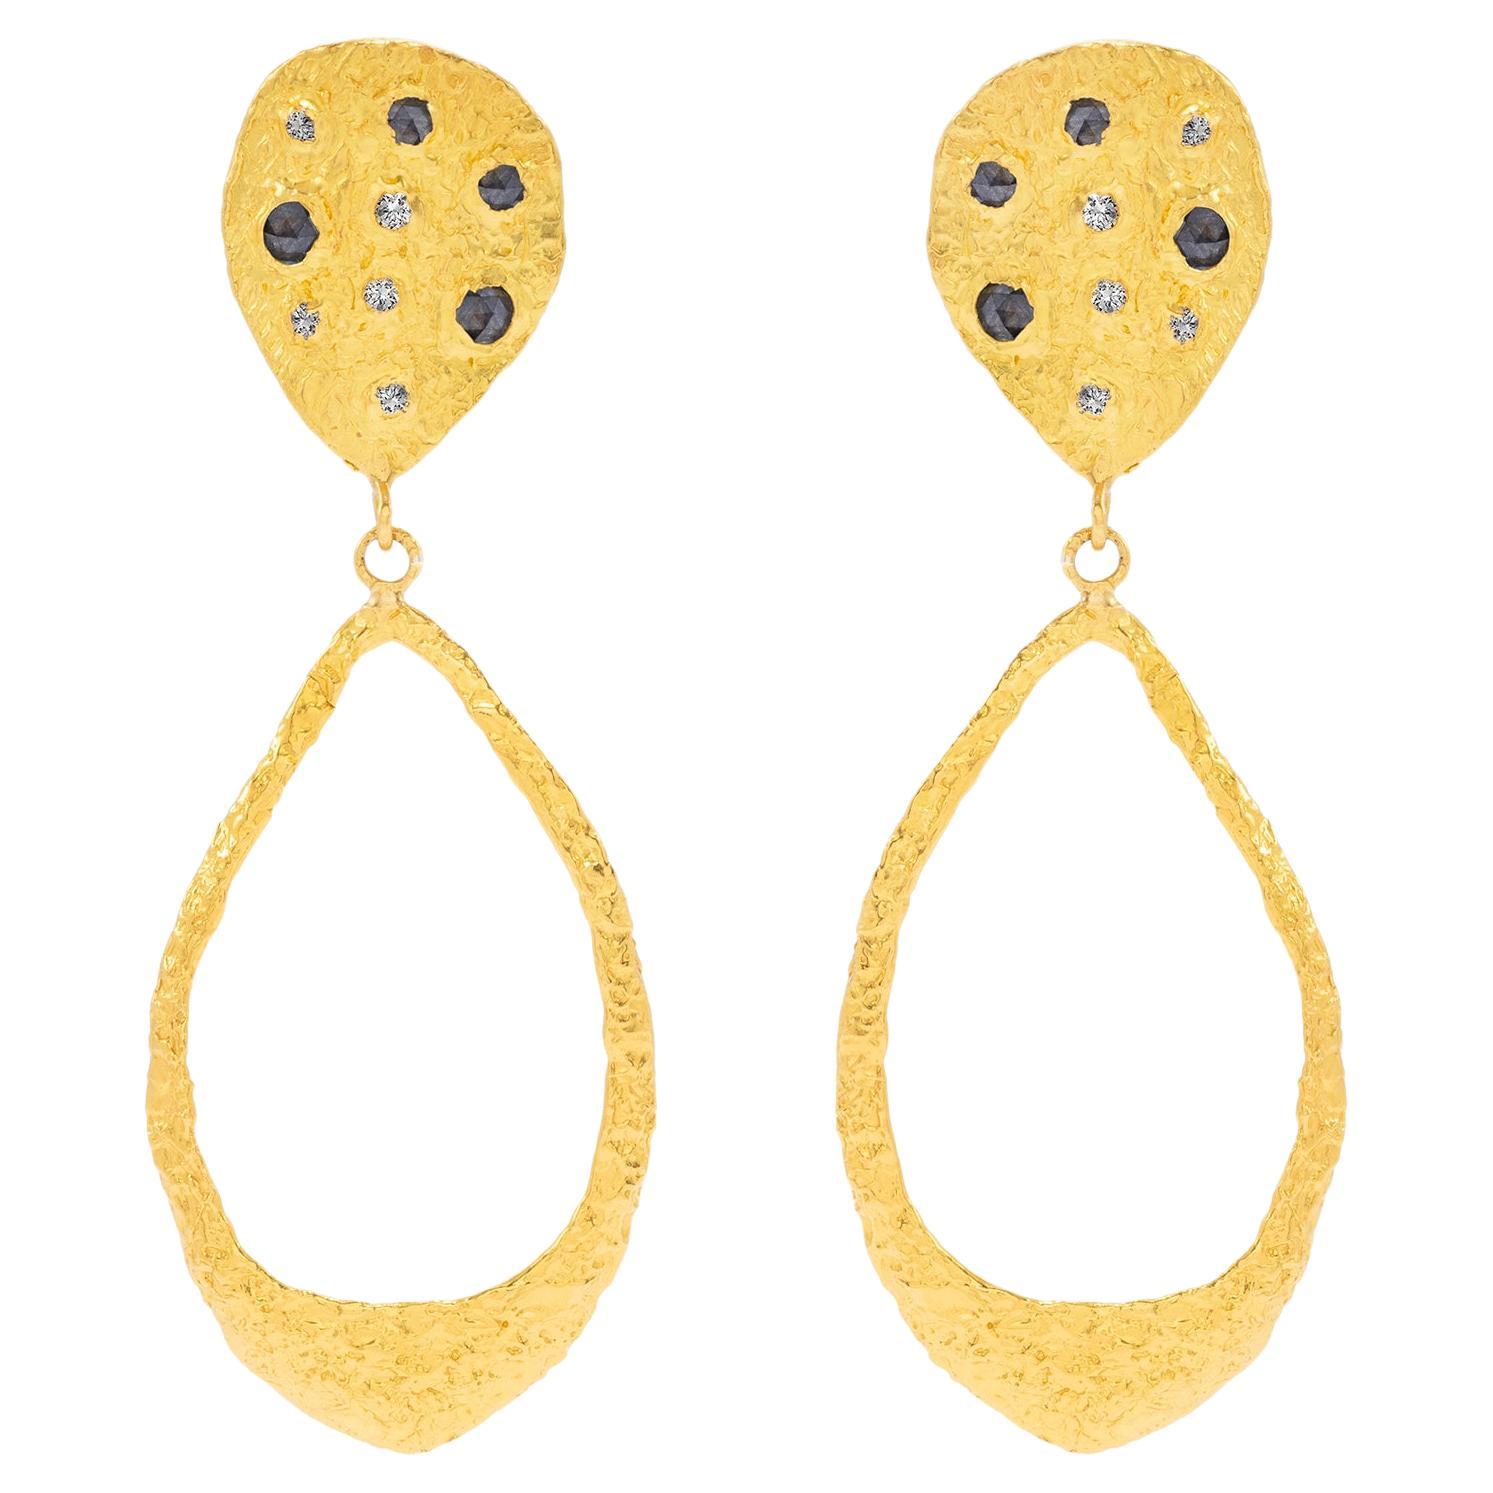 Signature Teardrop Earrings with Diamonds in 22k Gold, by Tagili For Sale